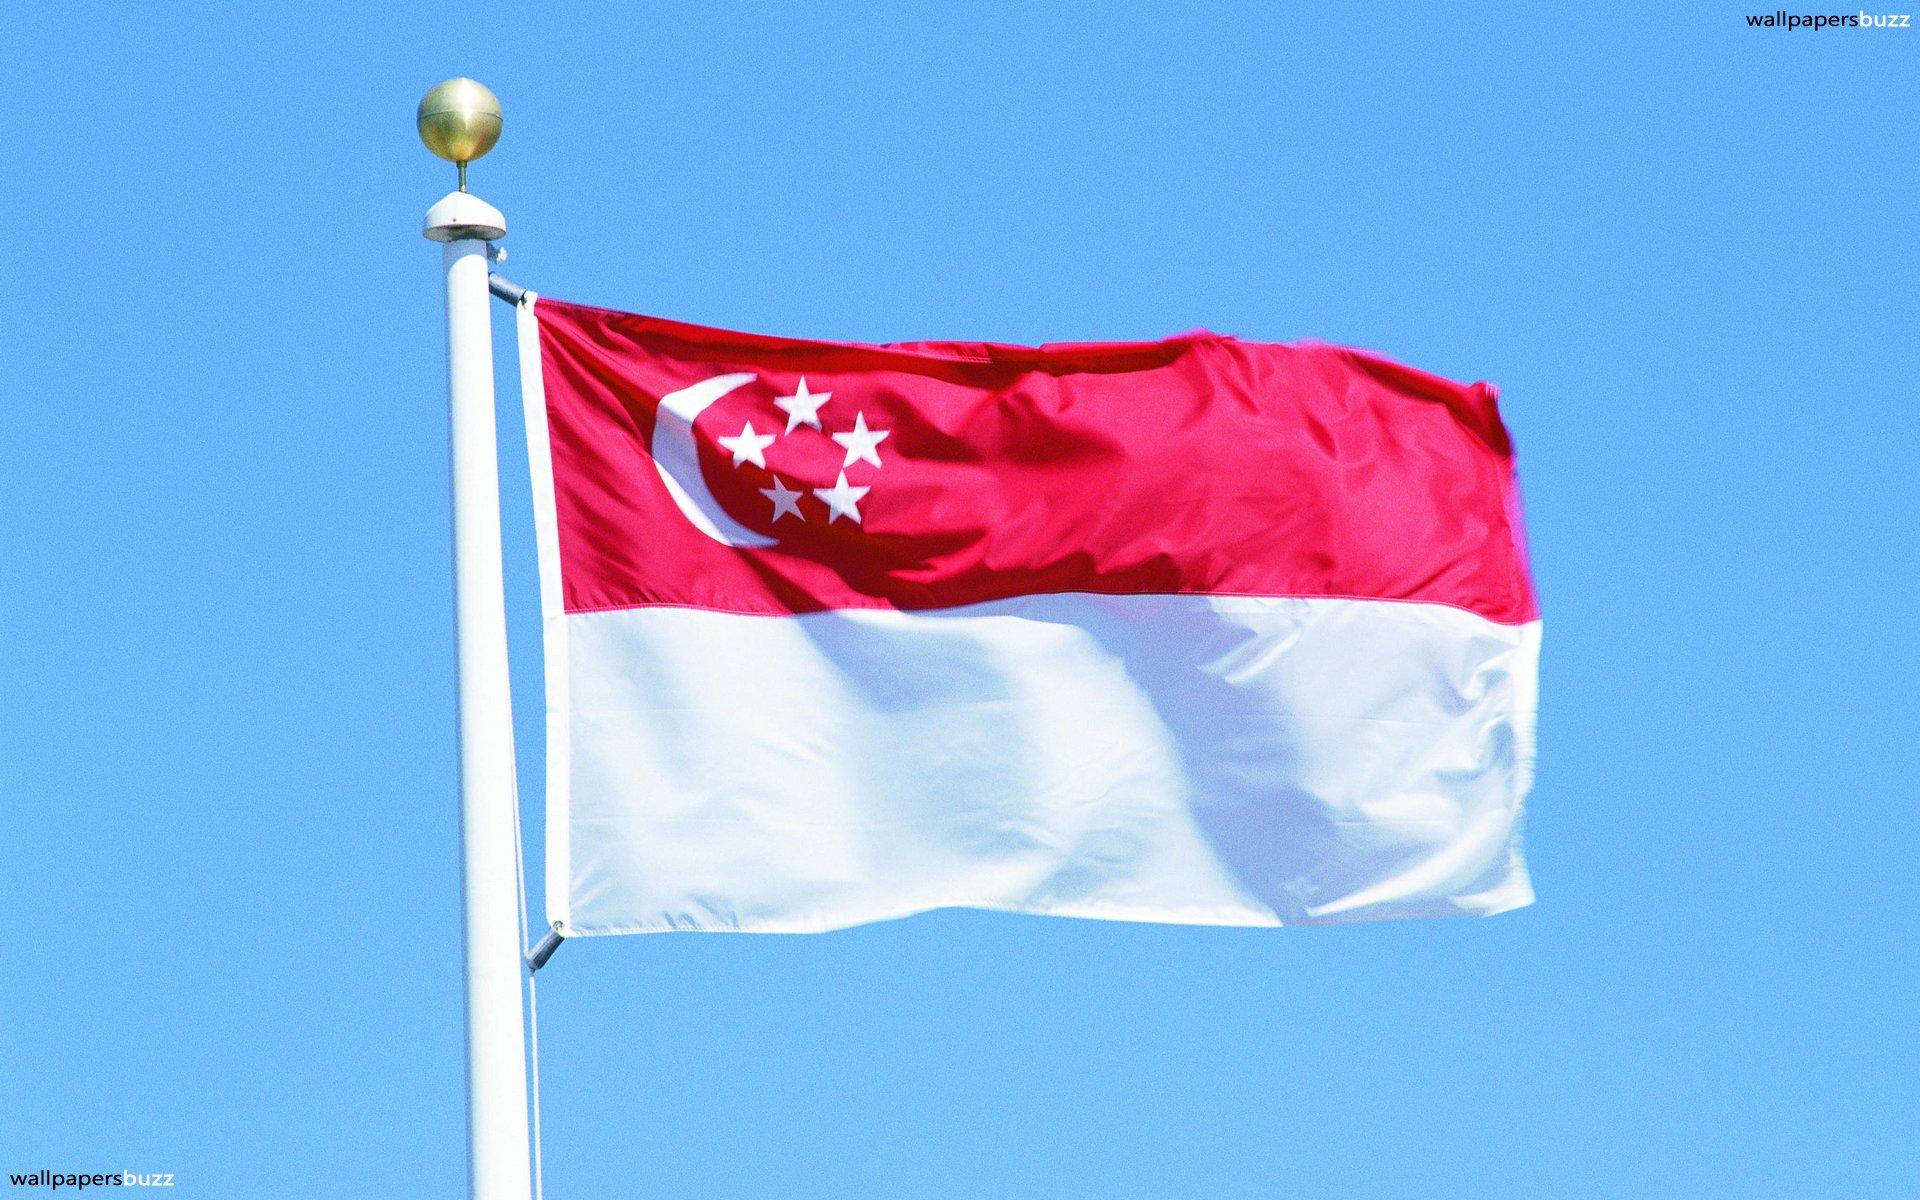 The traditional flag of Singapore HD Wallpapers